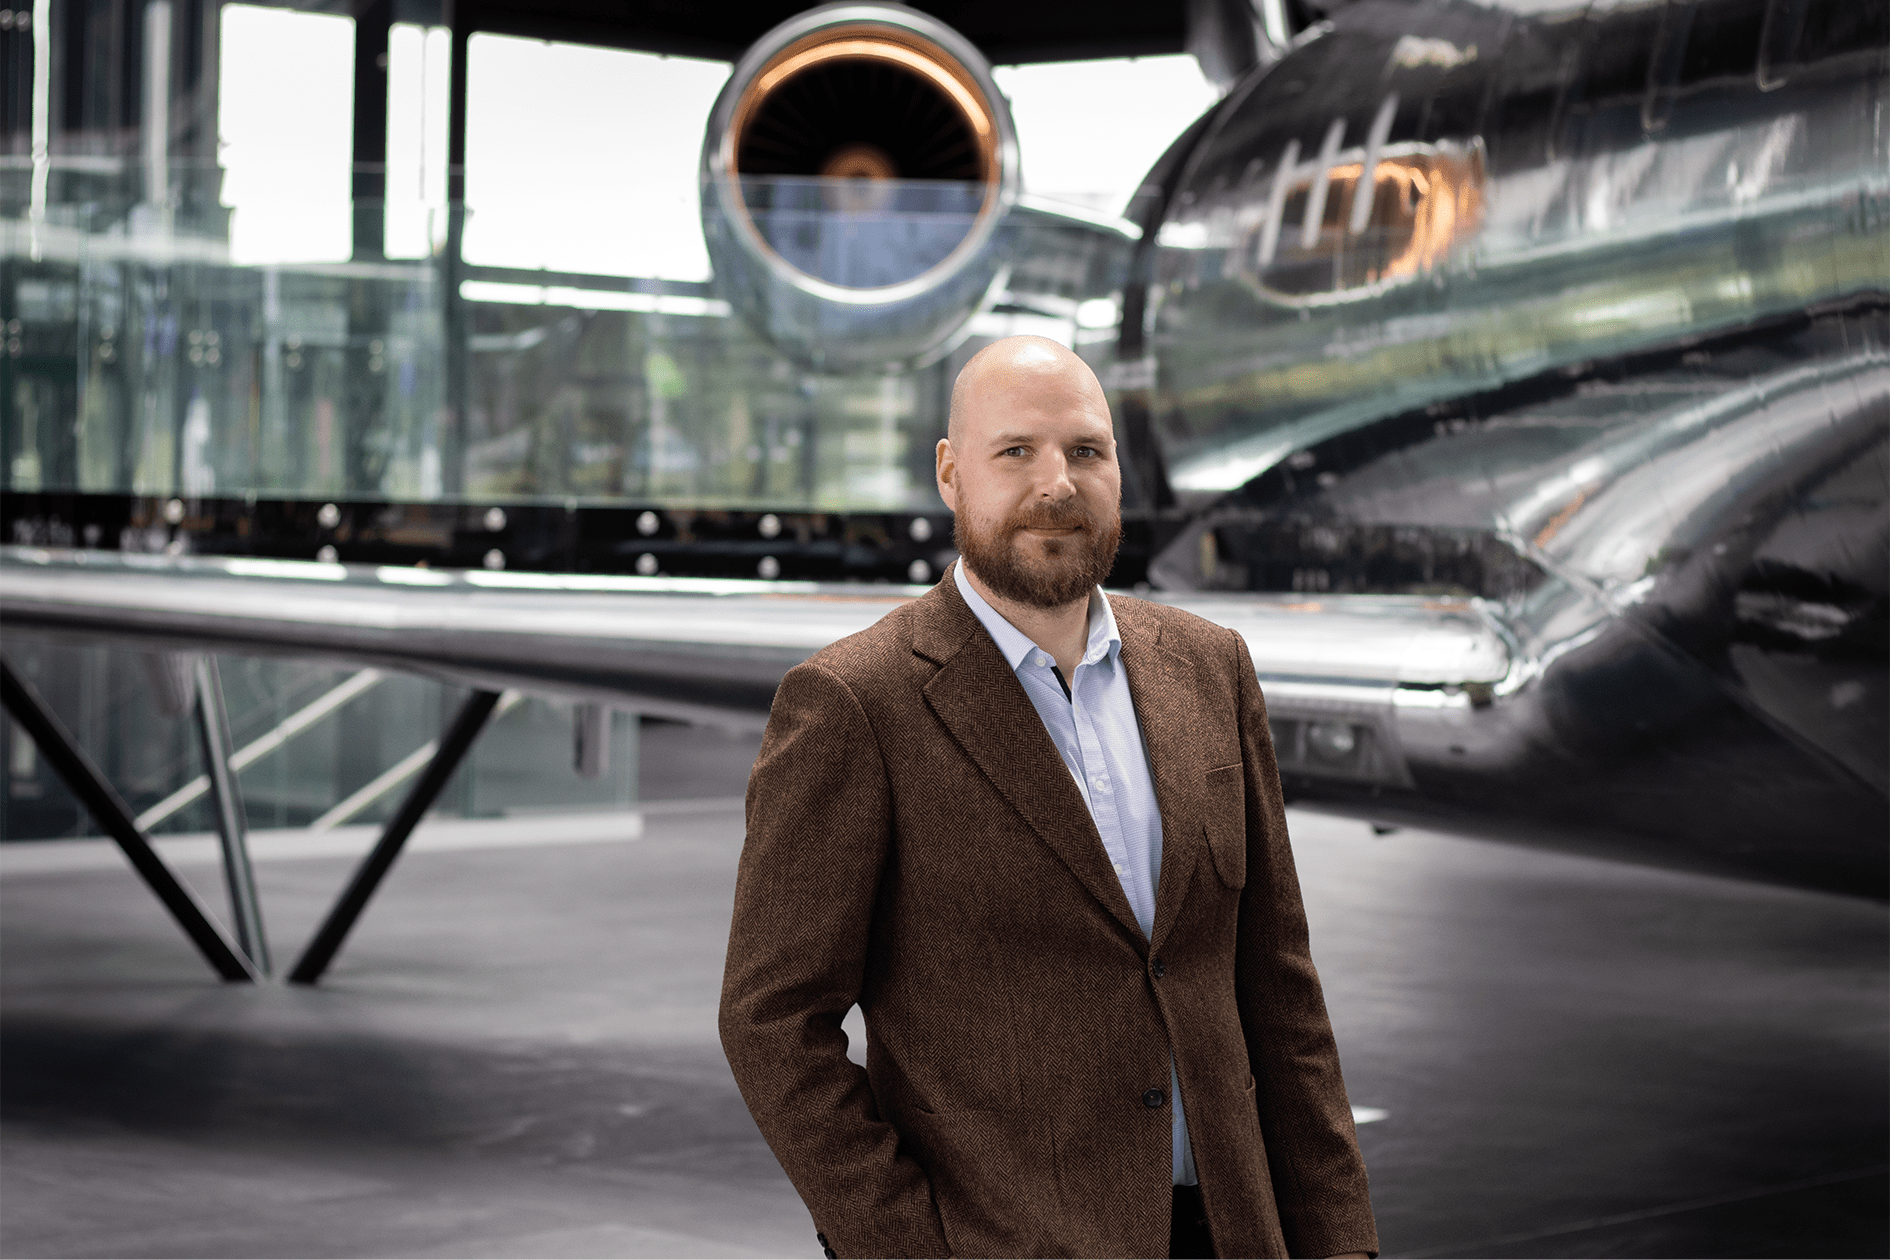 Donatas Žiburys, Fleet Development Manager at Avion Express, on passion for aviation and what makes a strong and unique team